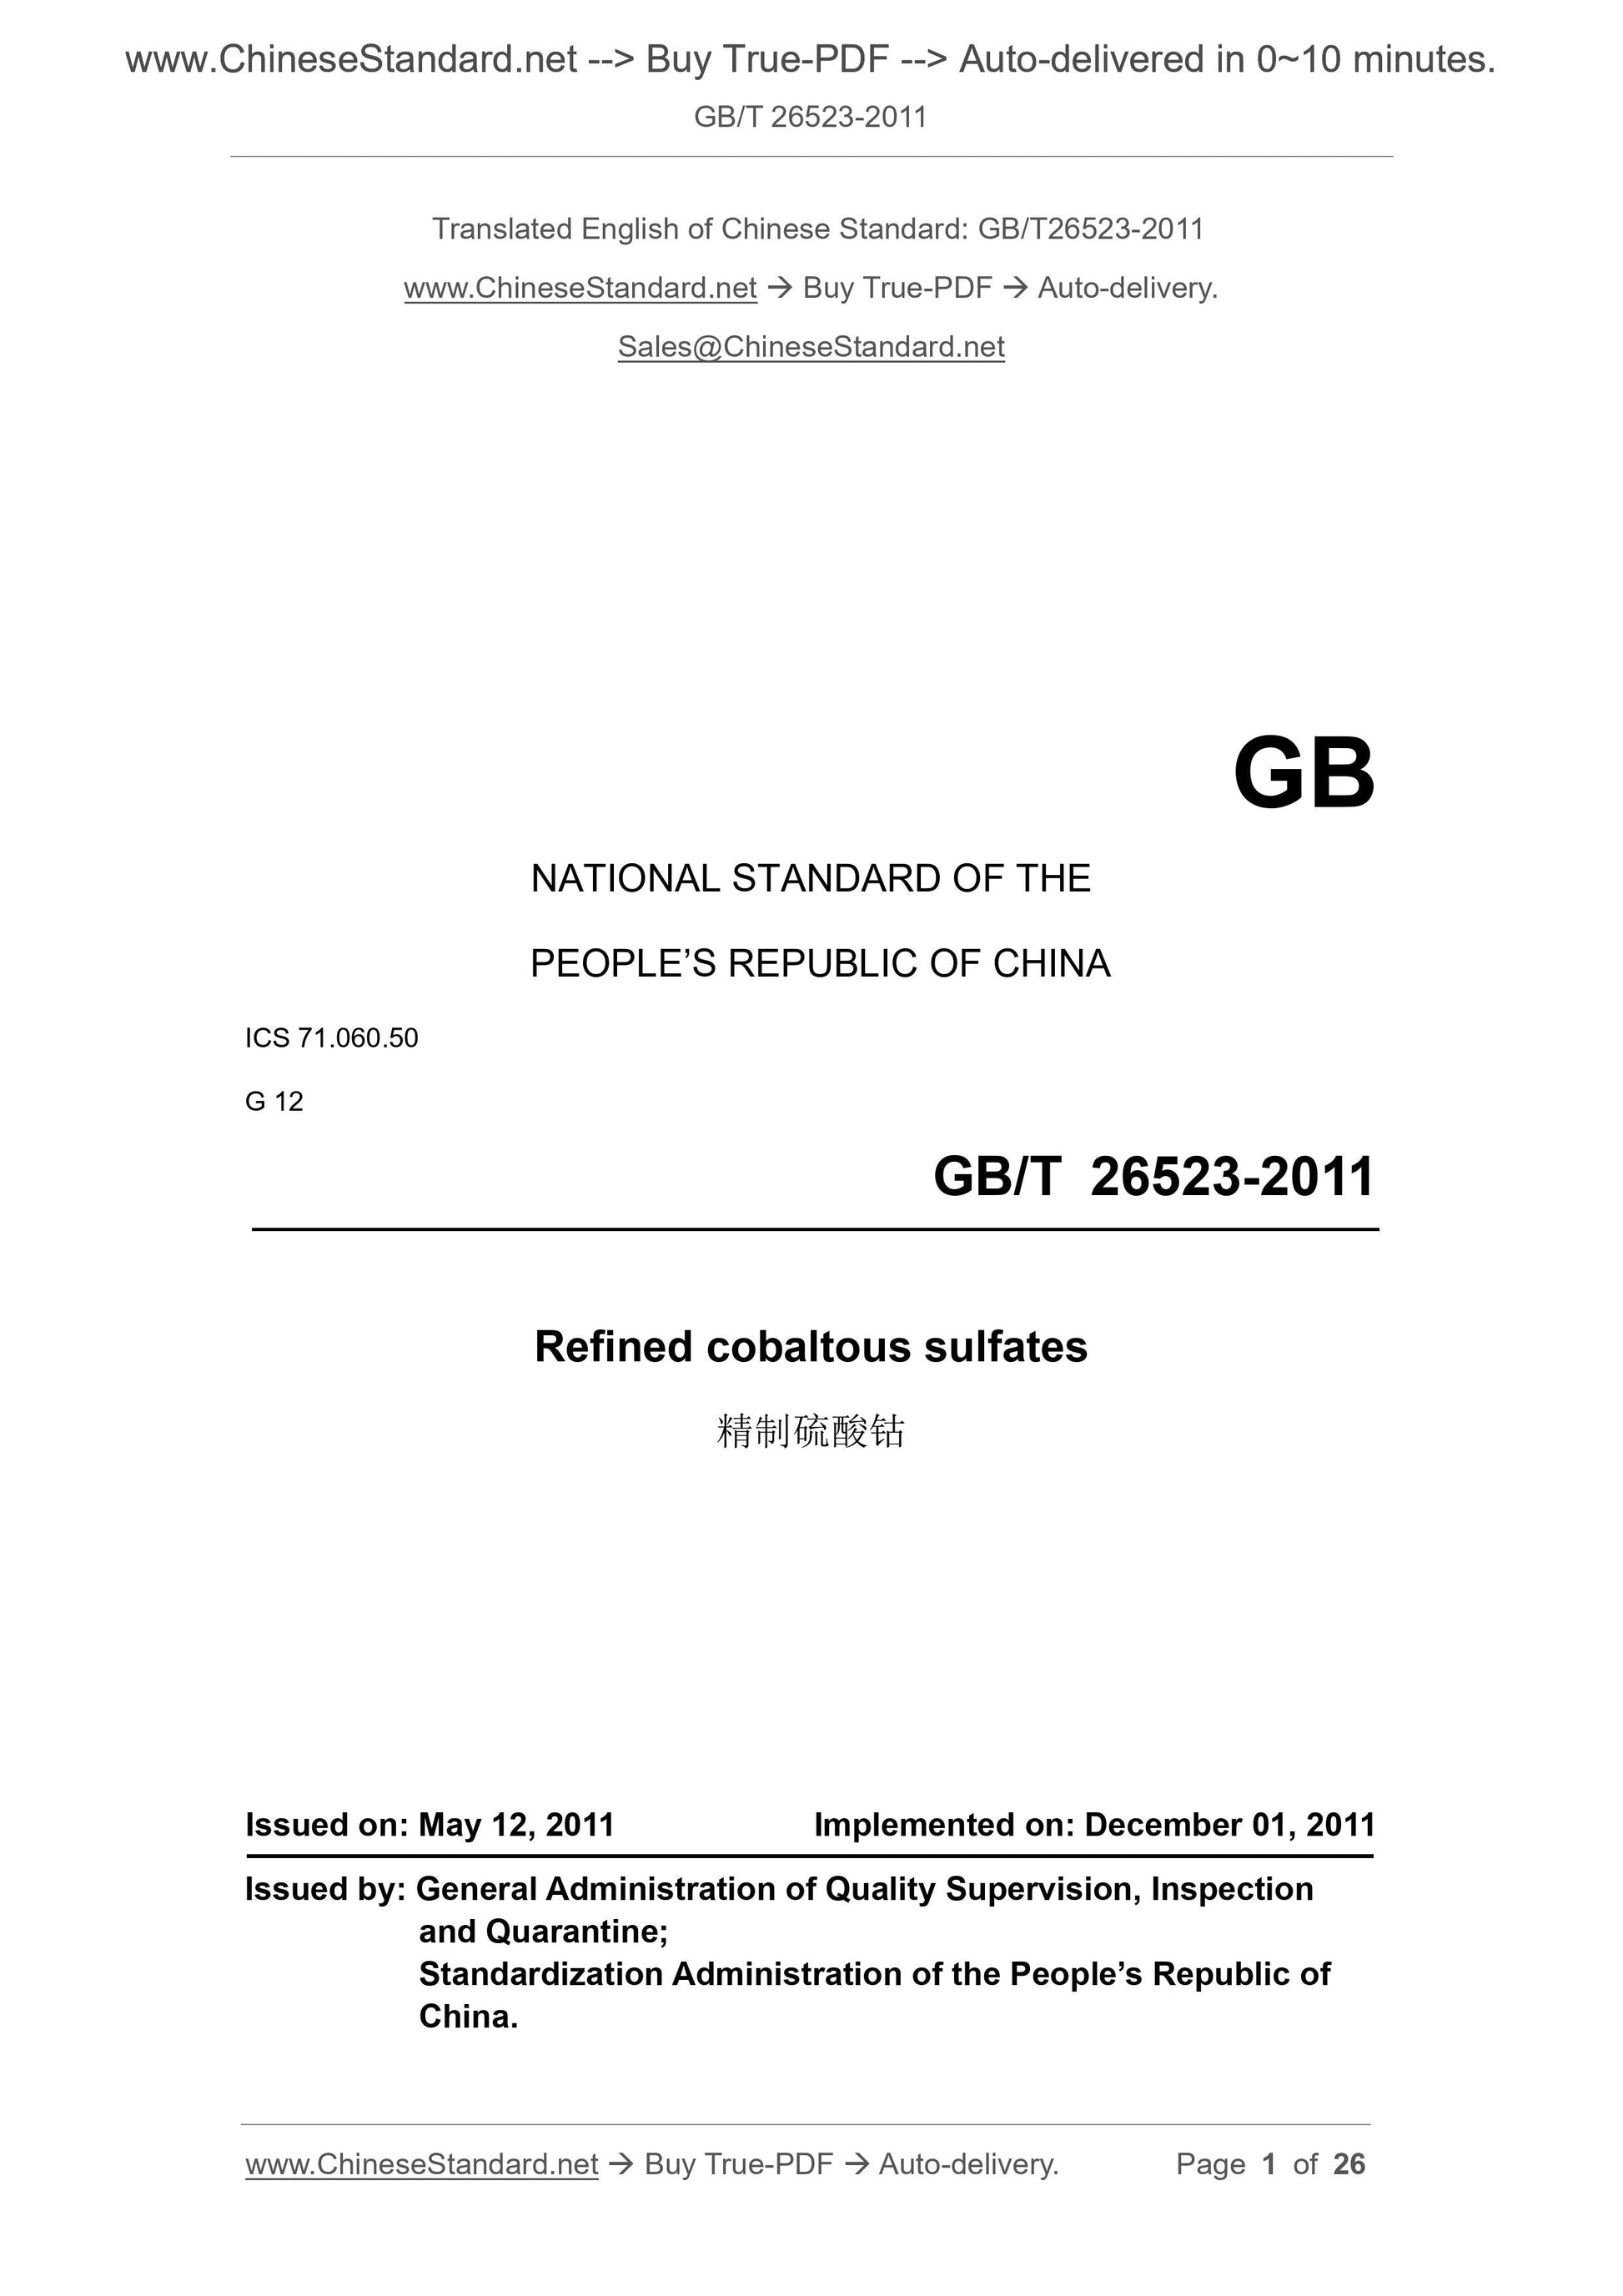 GB/T 26523-2011 Page 1